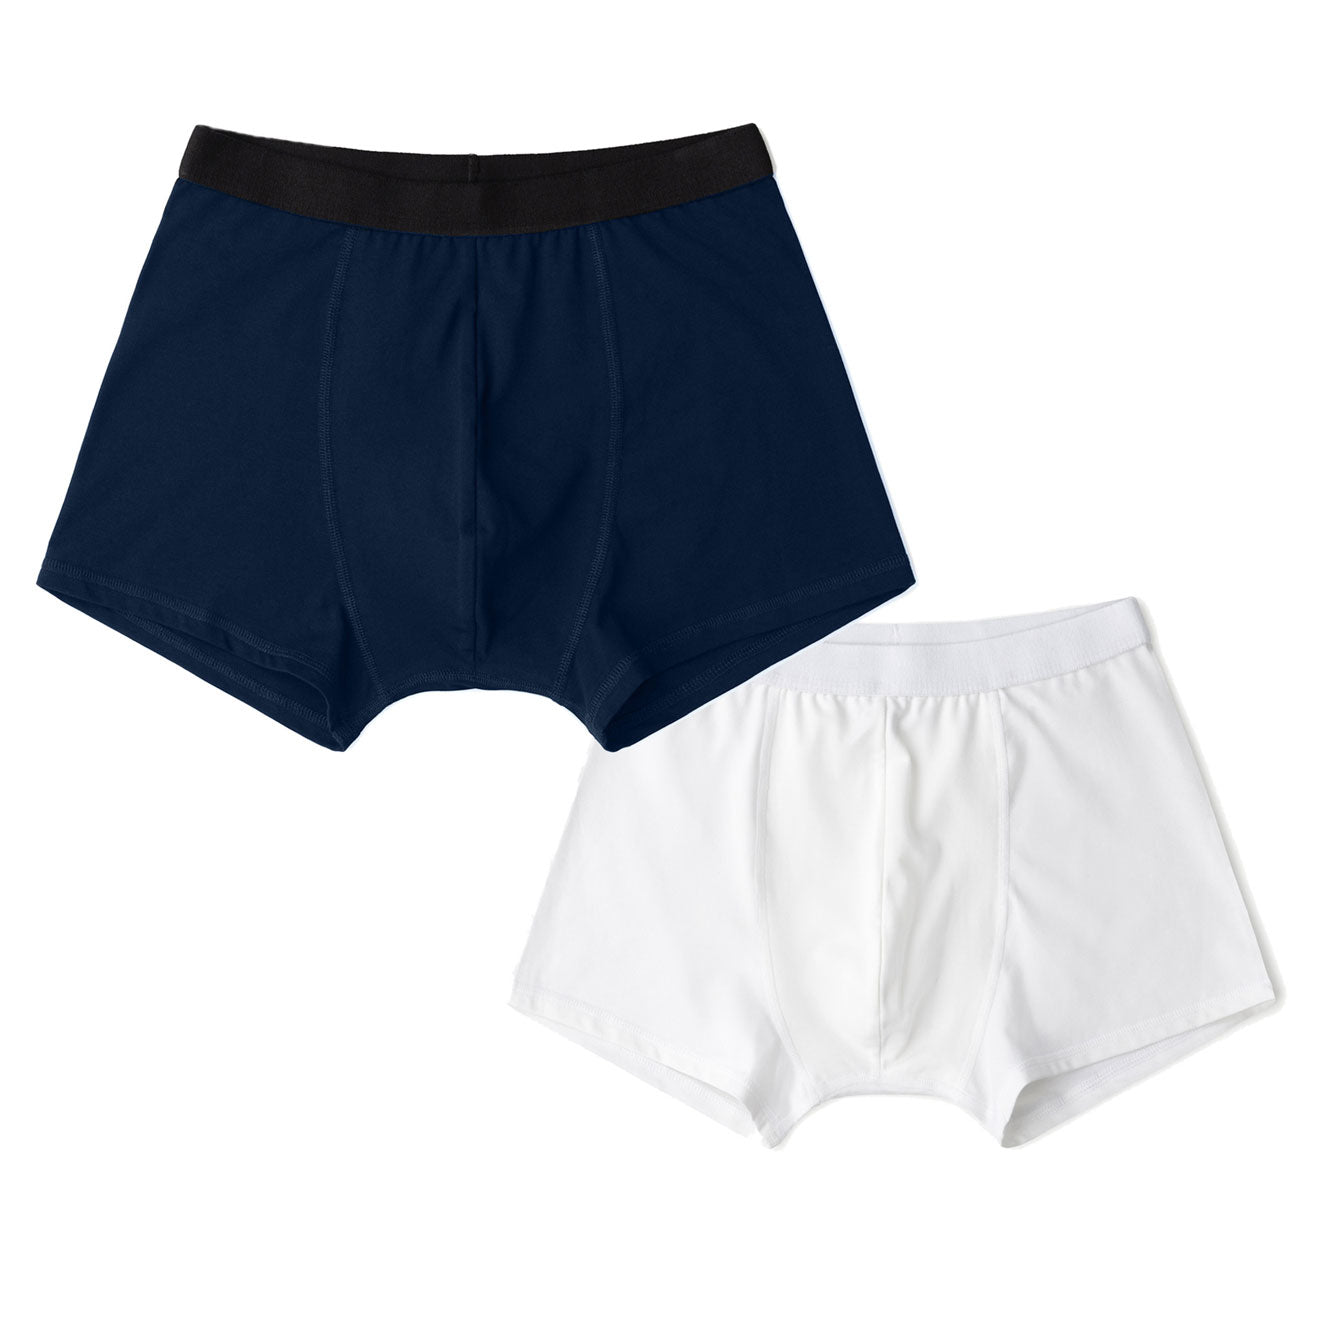 Navy White Organic & Recycled cotton Boxer Briefs, first fit promise 2 pack